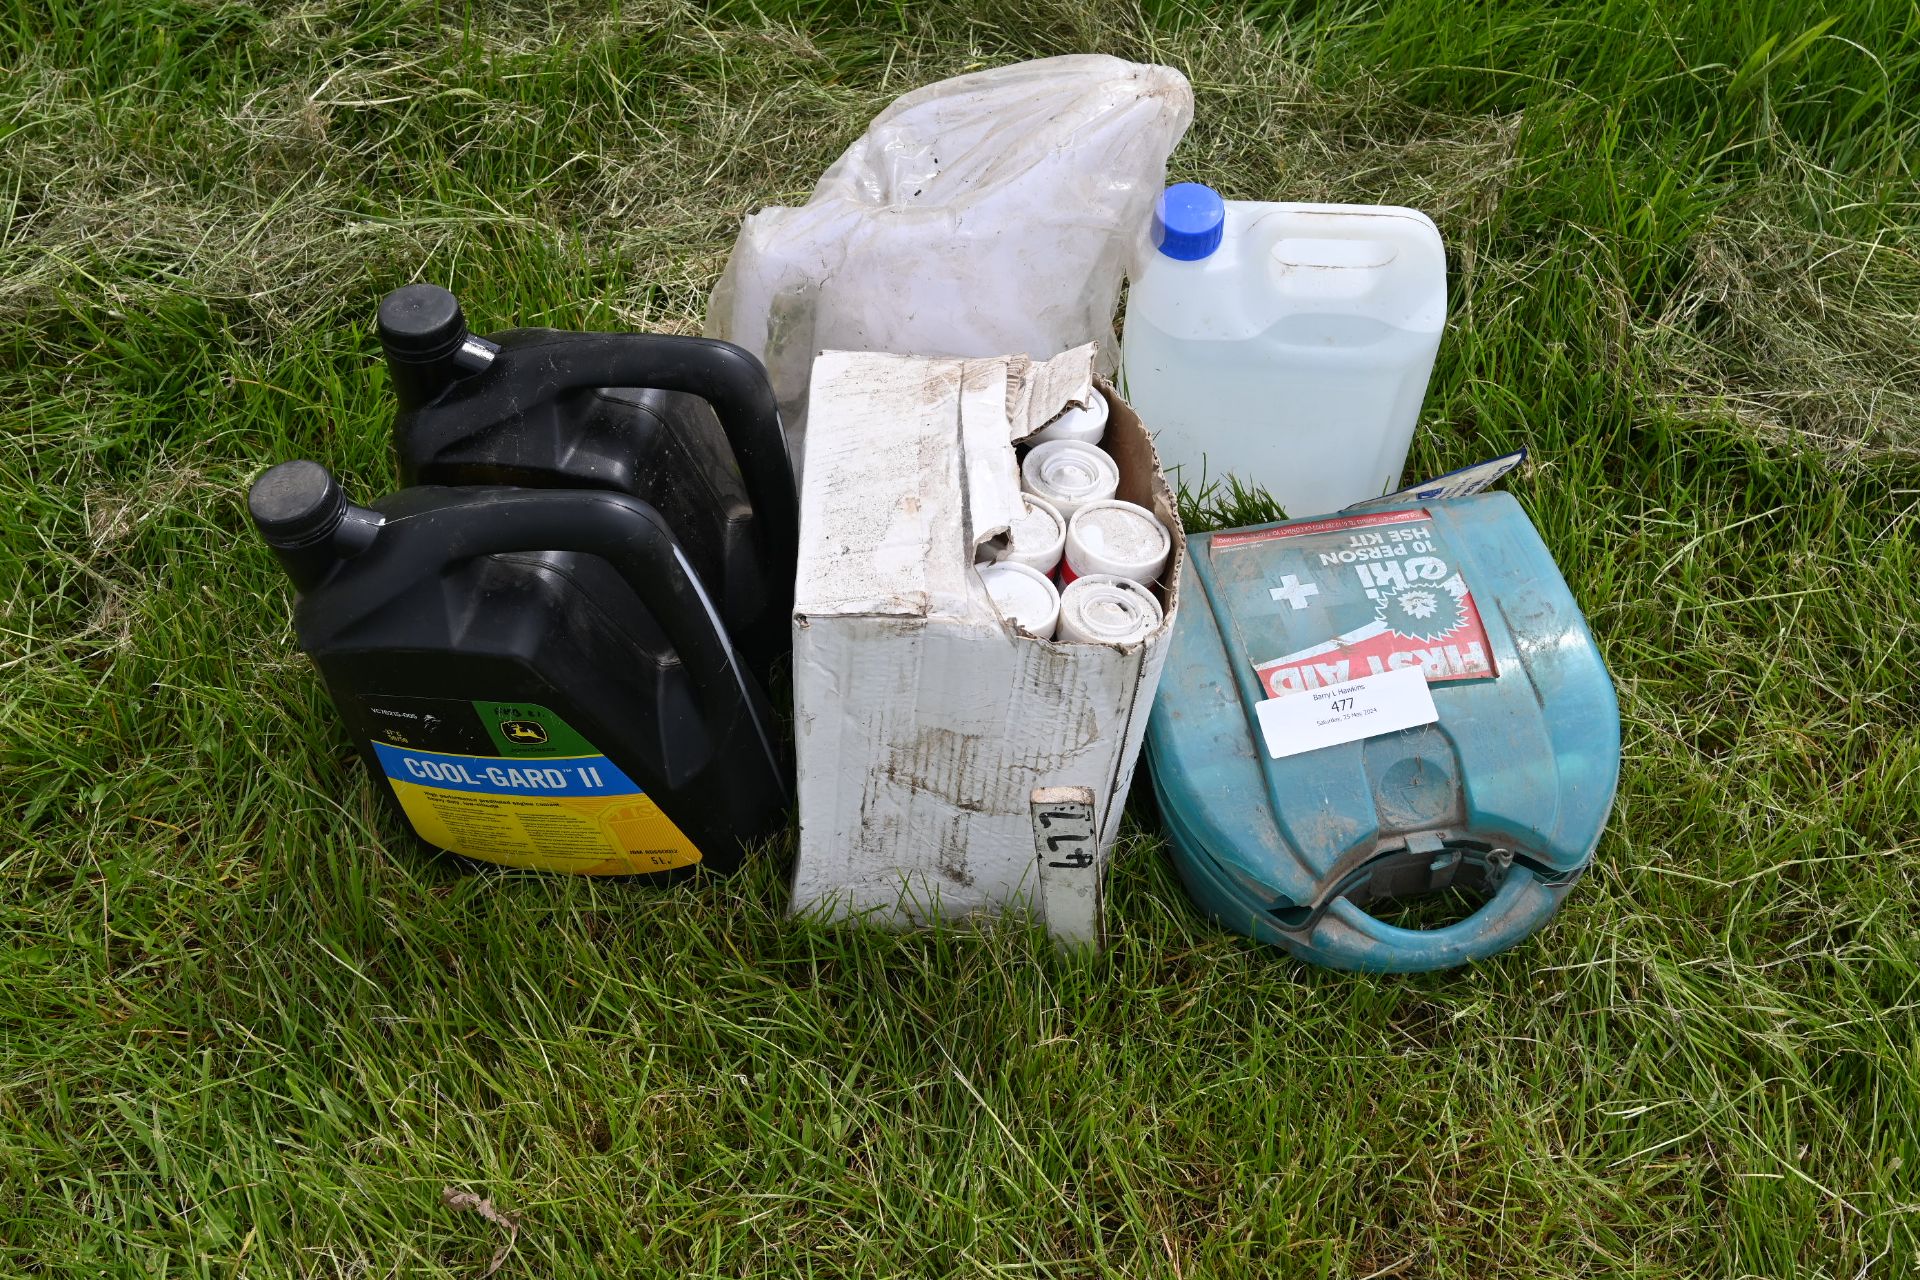 Oil, grease cartridges and oil jug